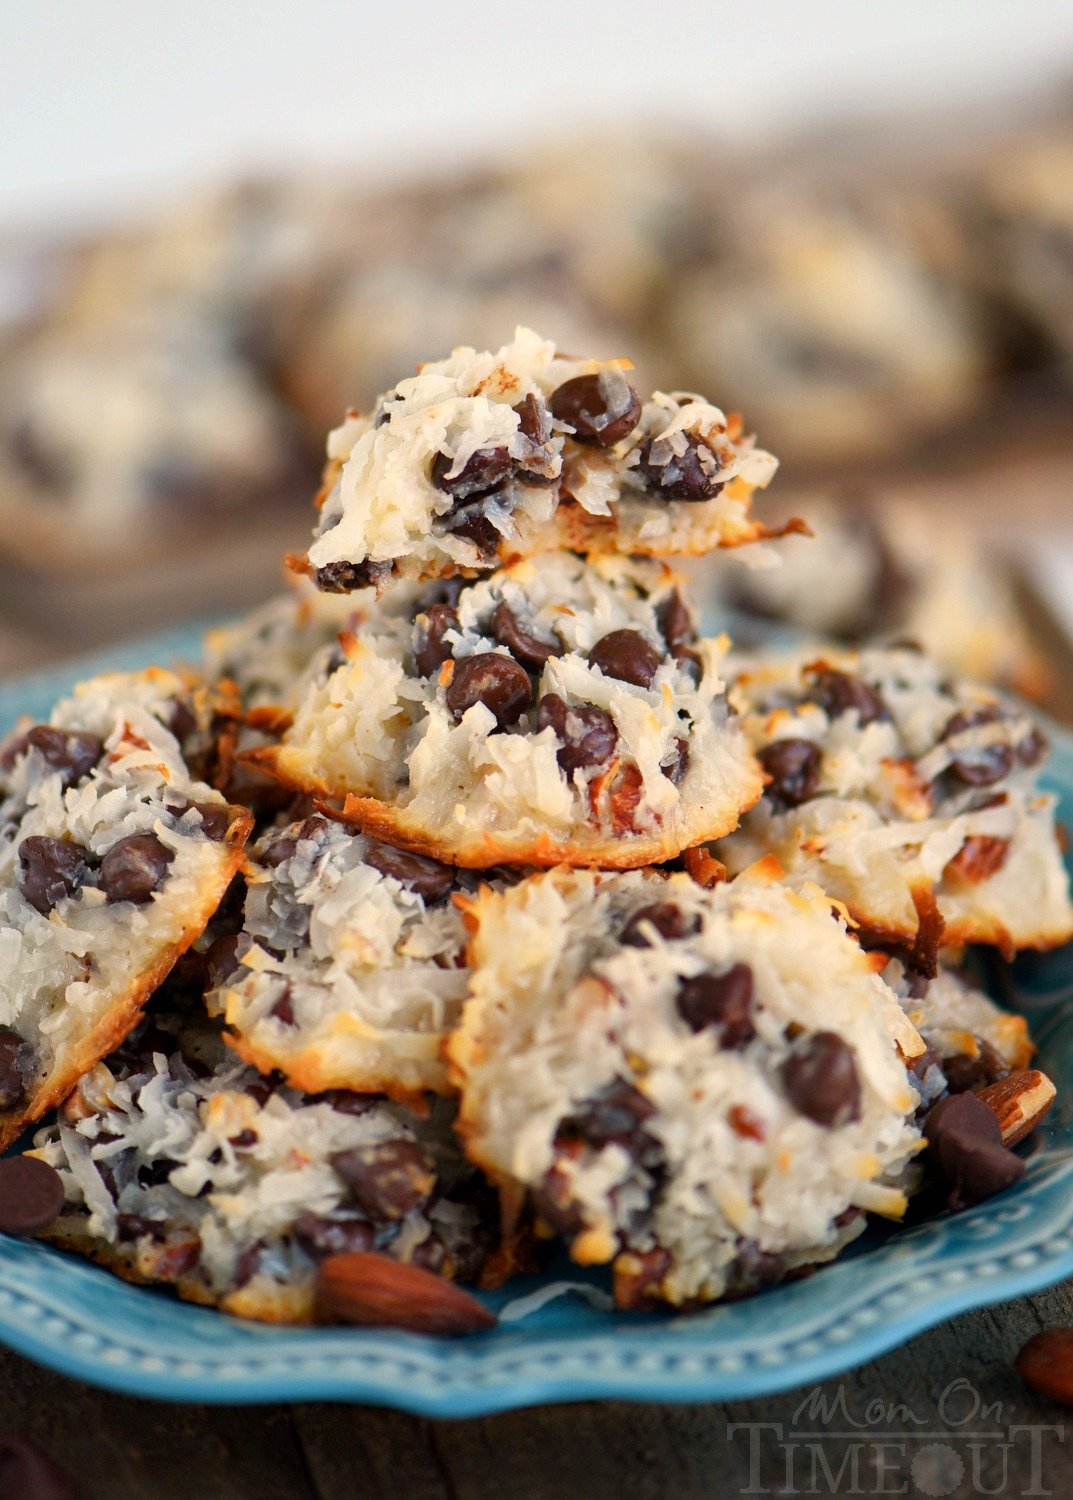 These easy Almond Joy Cookies take just four ingredients and don't even require a mixer! No beating, no chilling, just mix 'em up and throw 'em in the oven EASY! You're going to love these ooey gooey fabulous cookies!